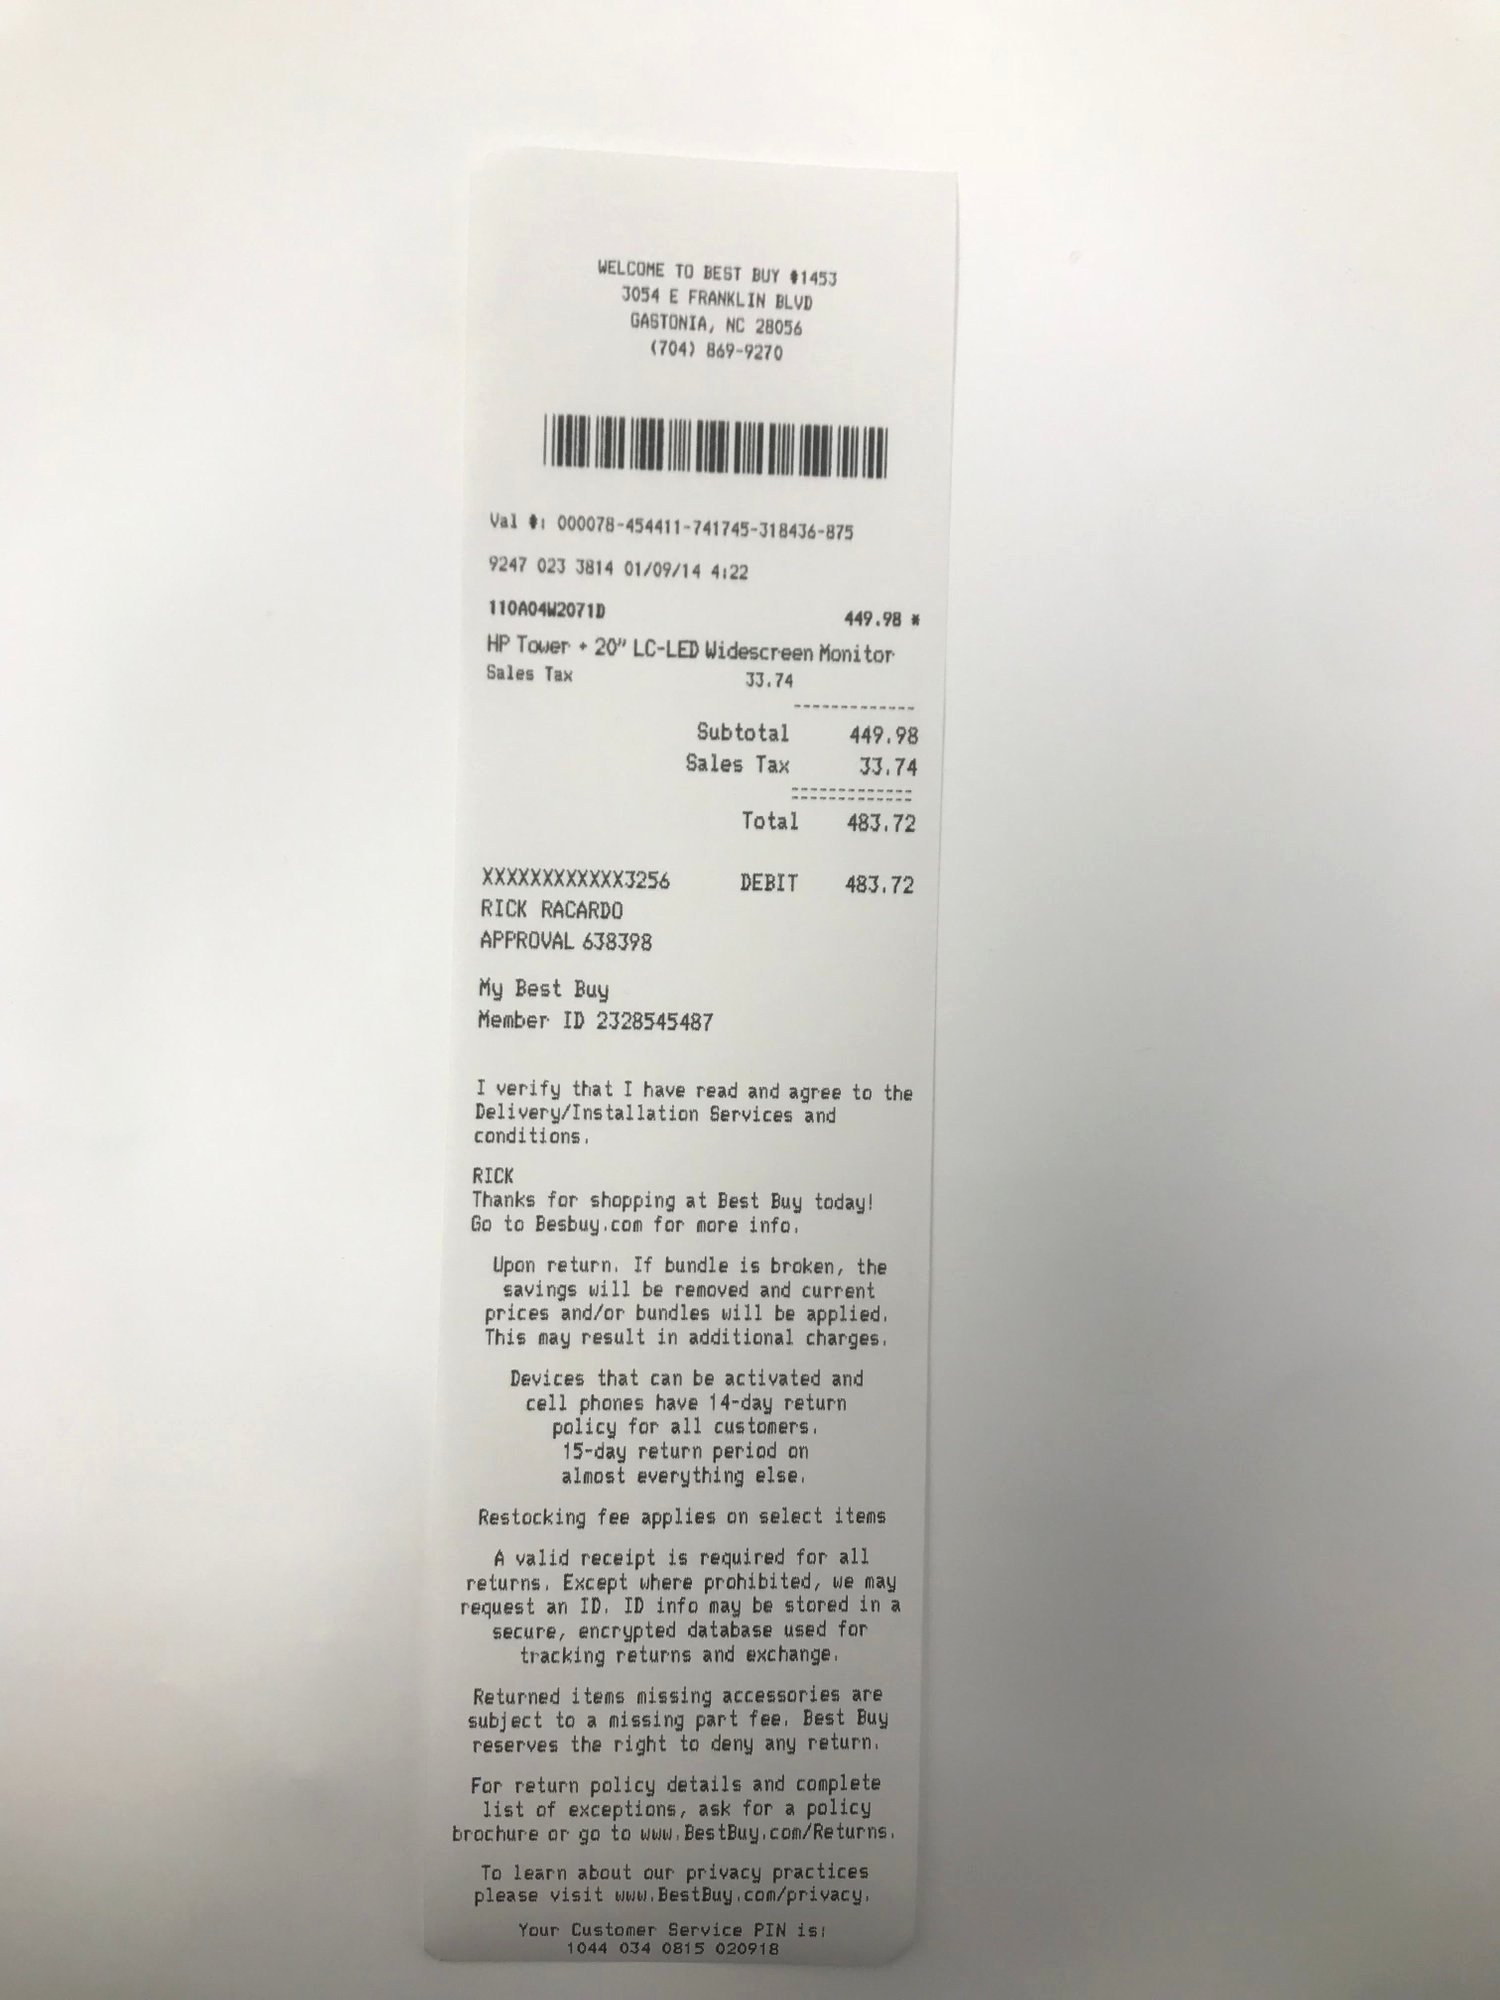 Product Purchase Receipt Number Awesome Best Buy Receipt